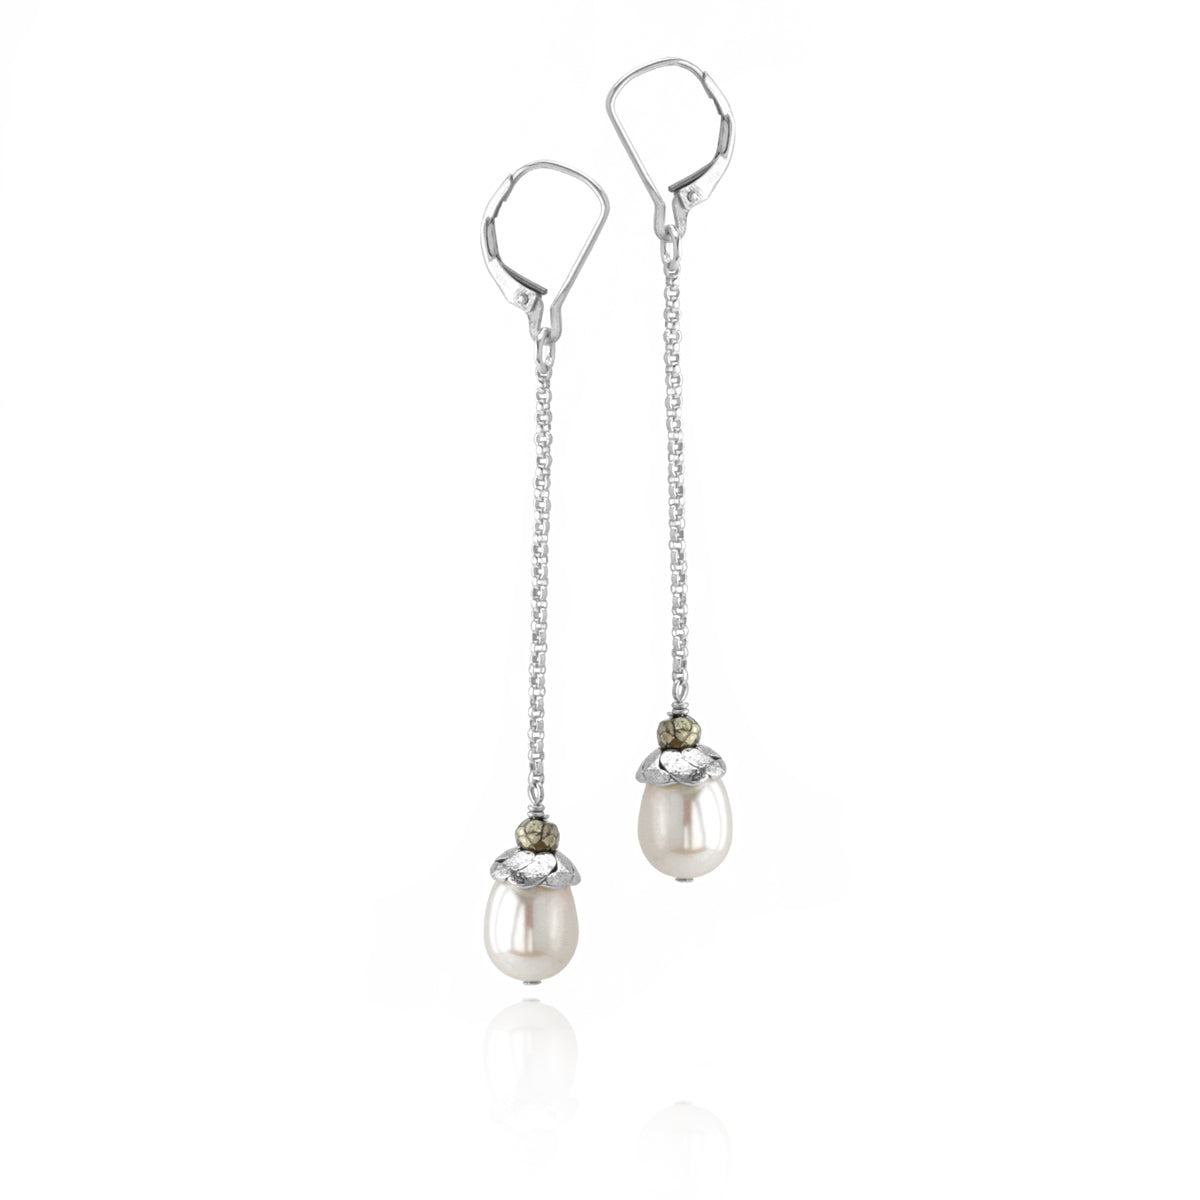 Pyrite and Pearl Earrings